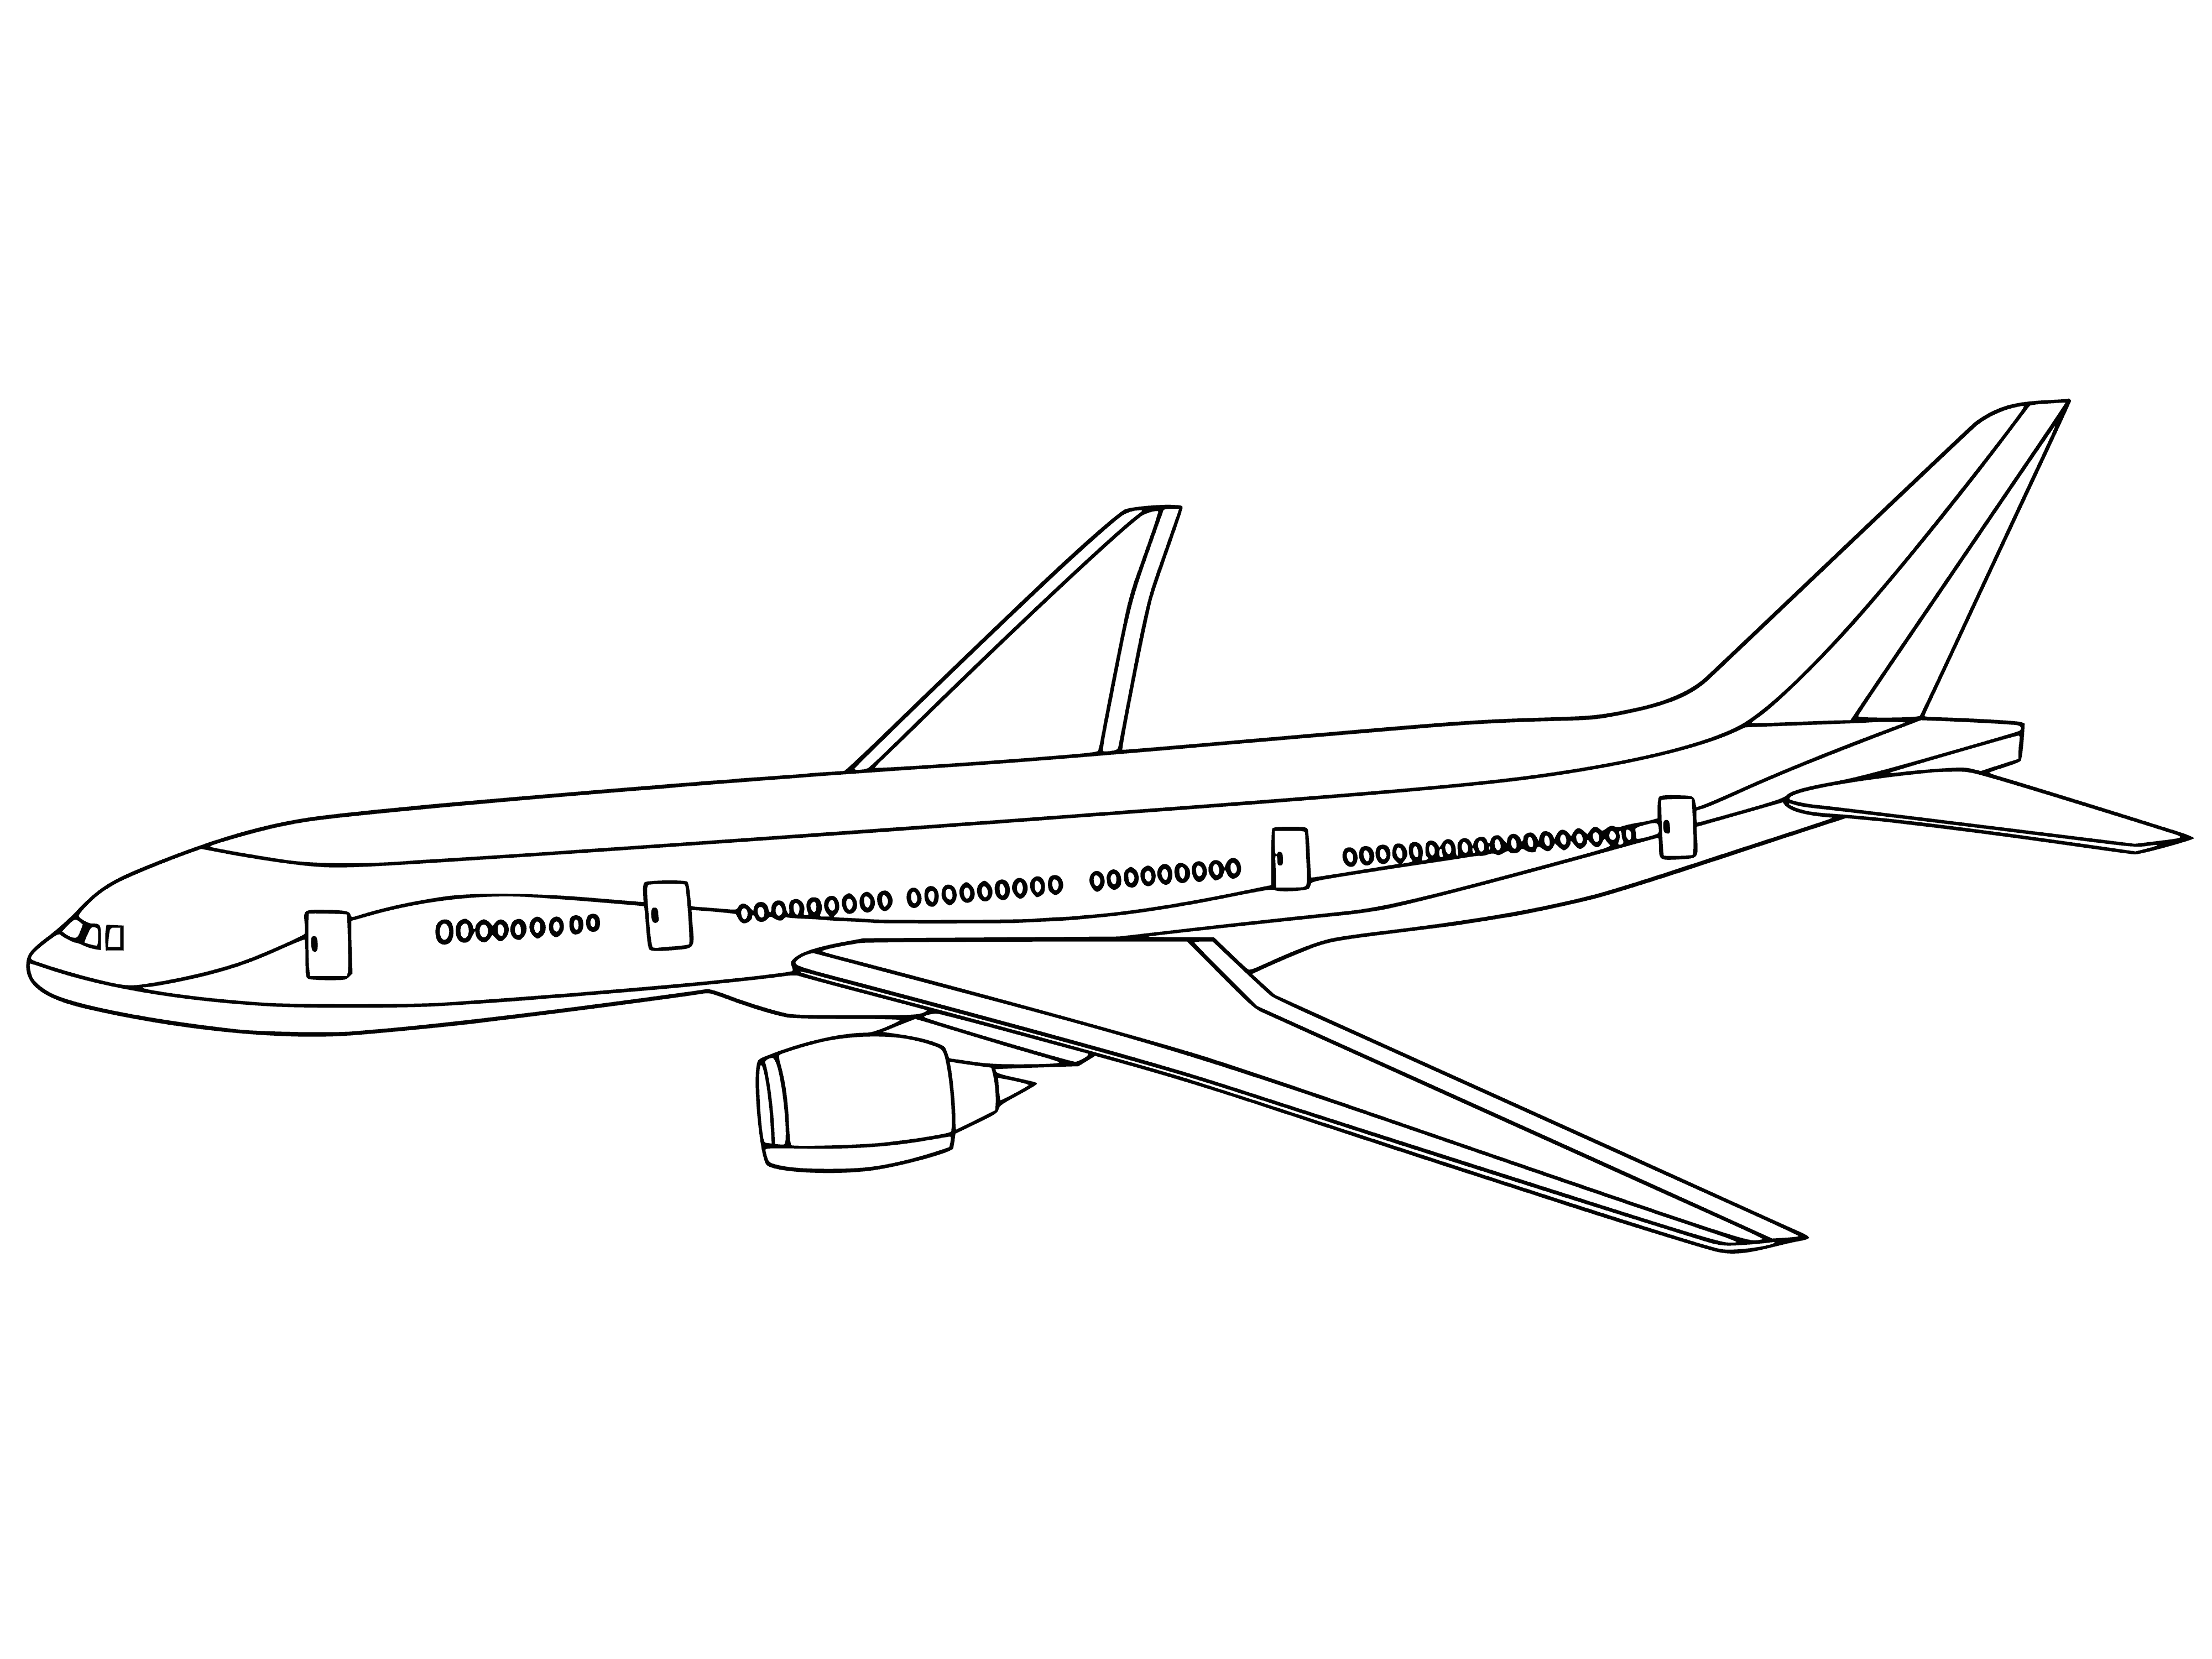 Airliner coloring page